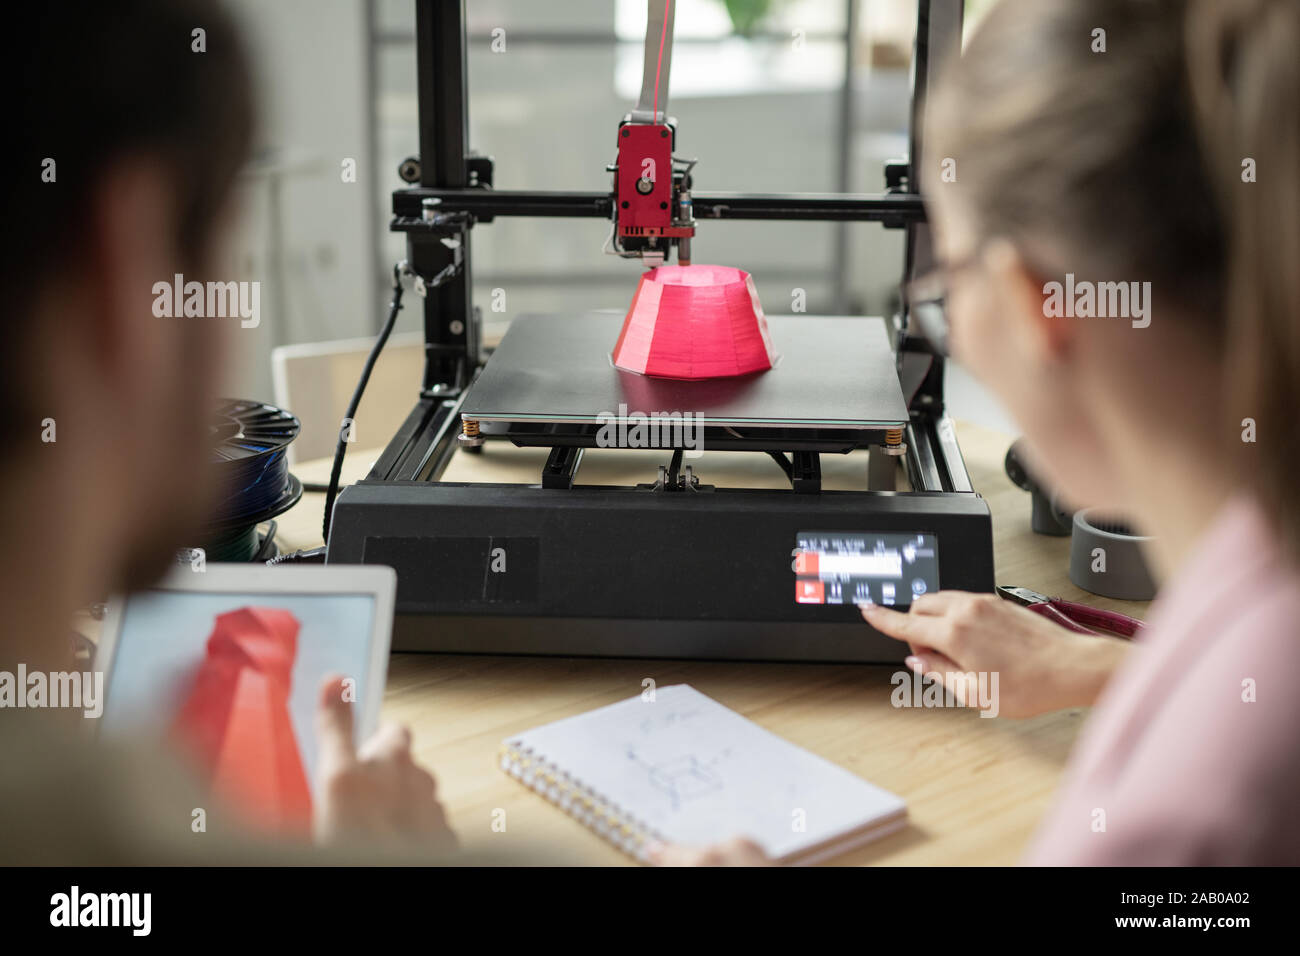 One of young managers pressing button on control panel of 3d printer Stock Photo